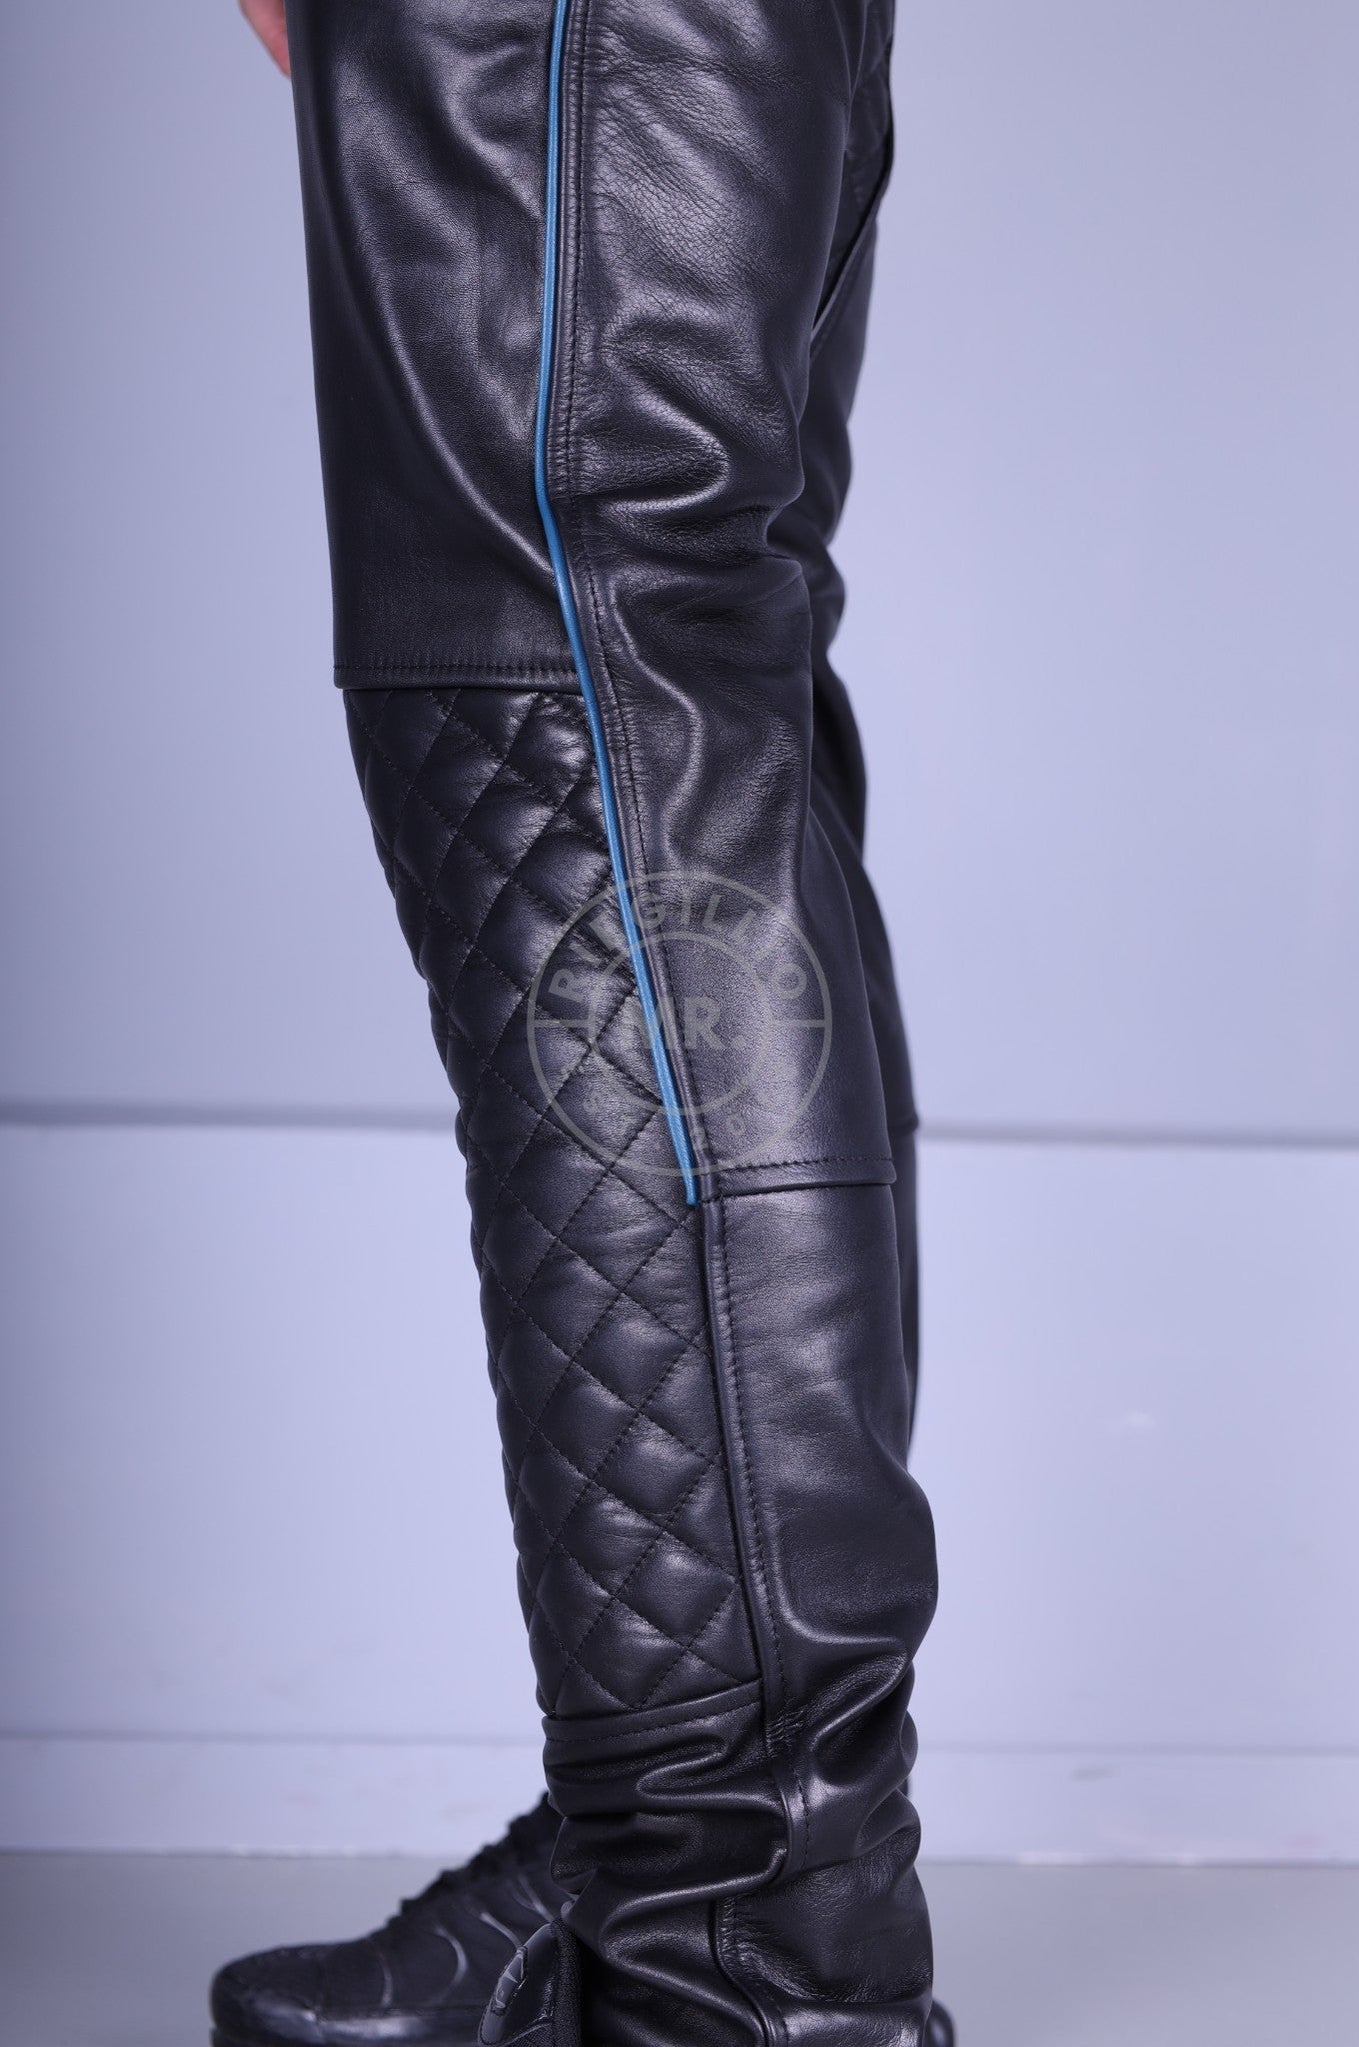 Padded Leather Pants - Jeans Blue Piping at MR. Riegillio